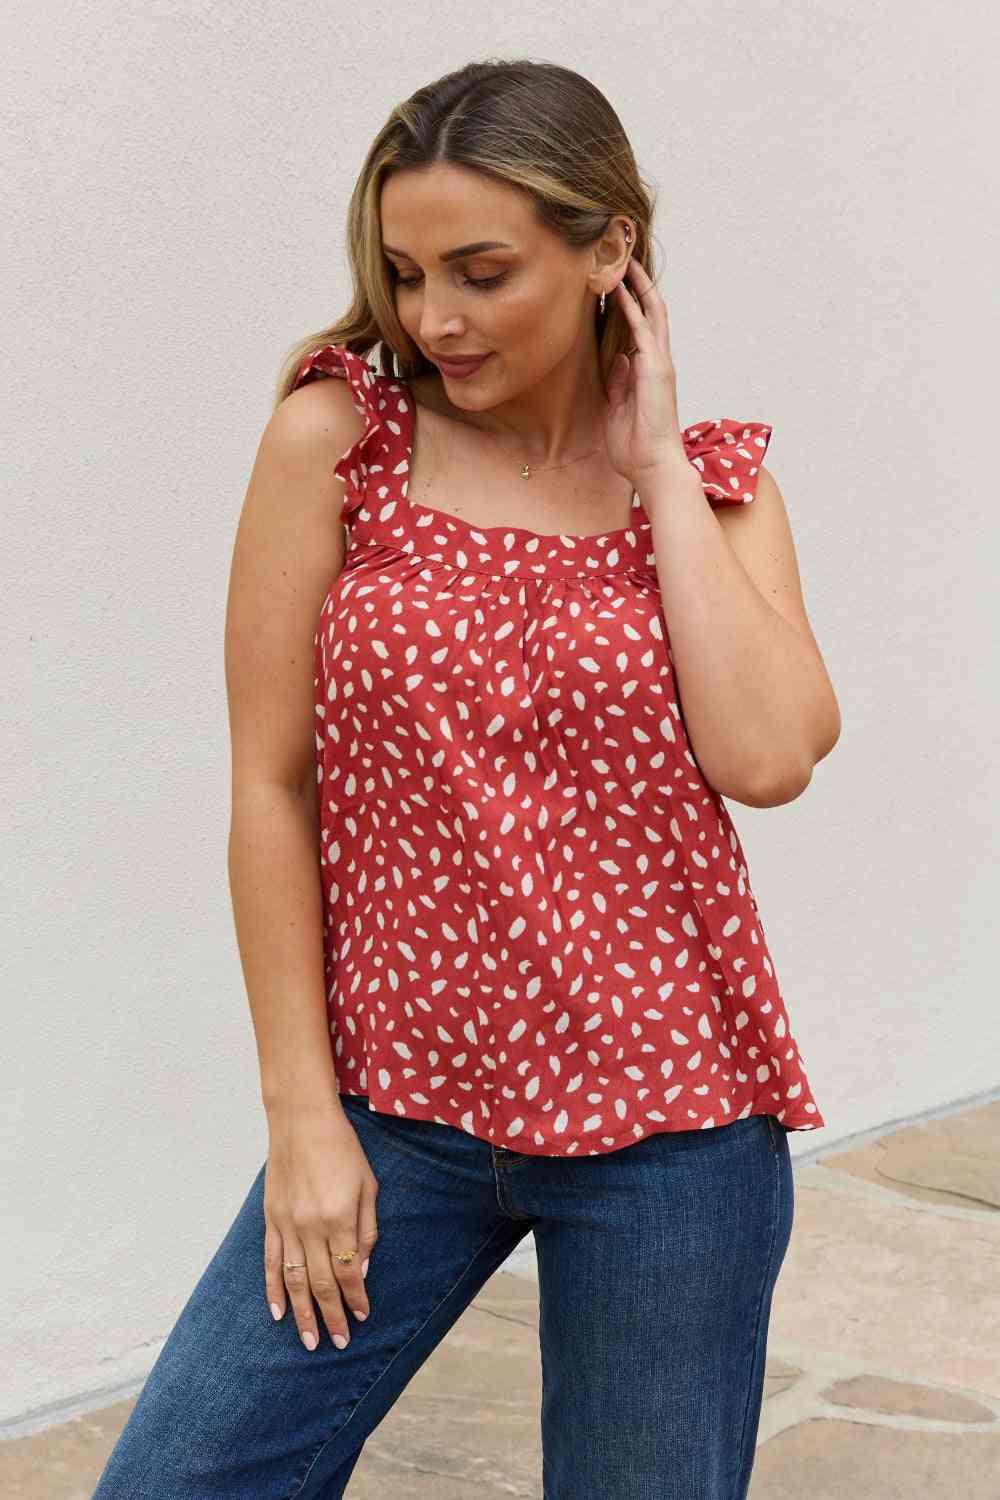 Woven Top in Brick - Camis & Tops - Shirts & Tops - 8 - 2024